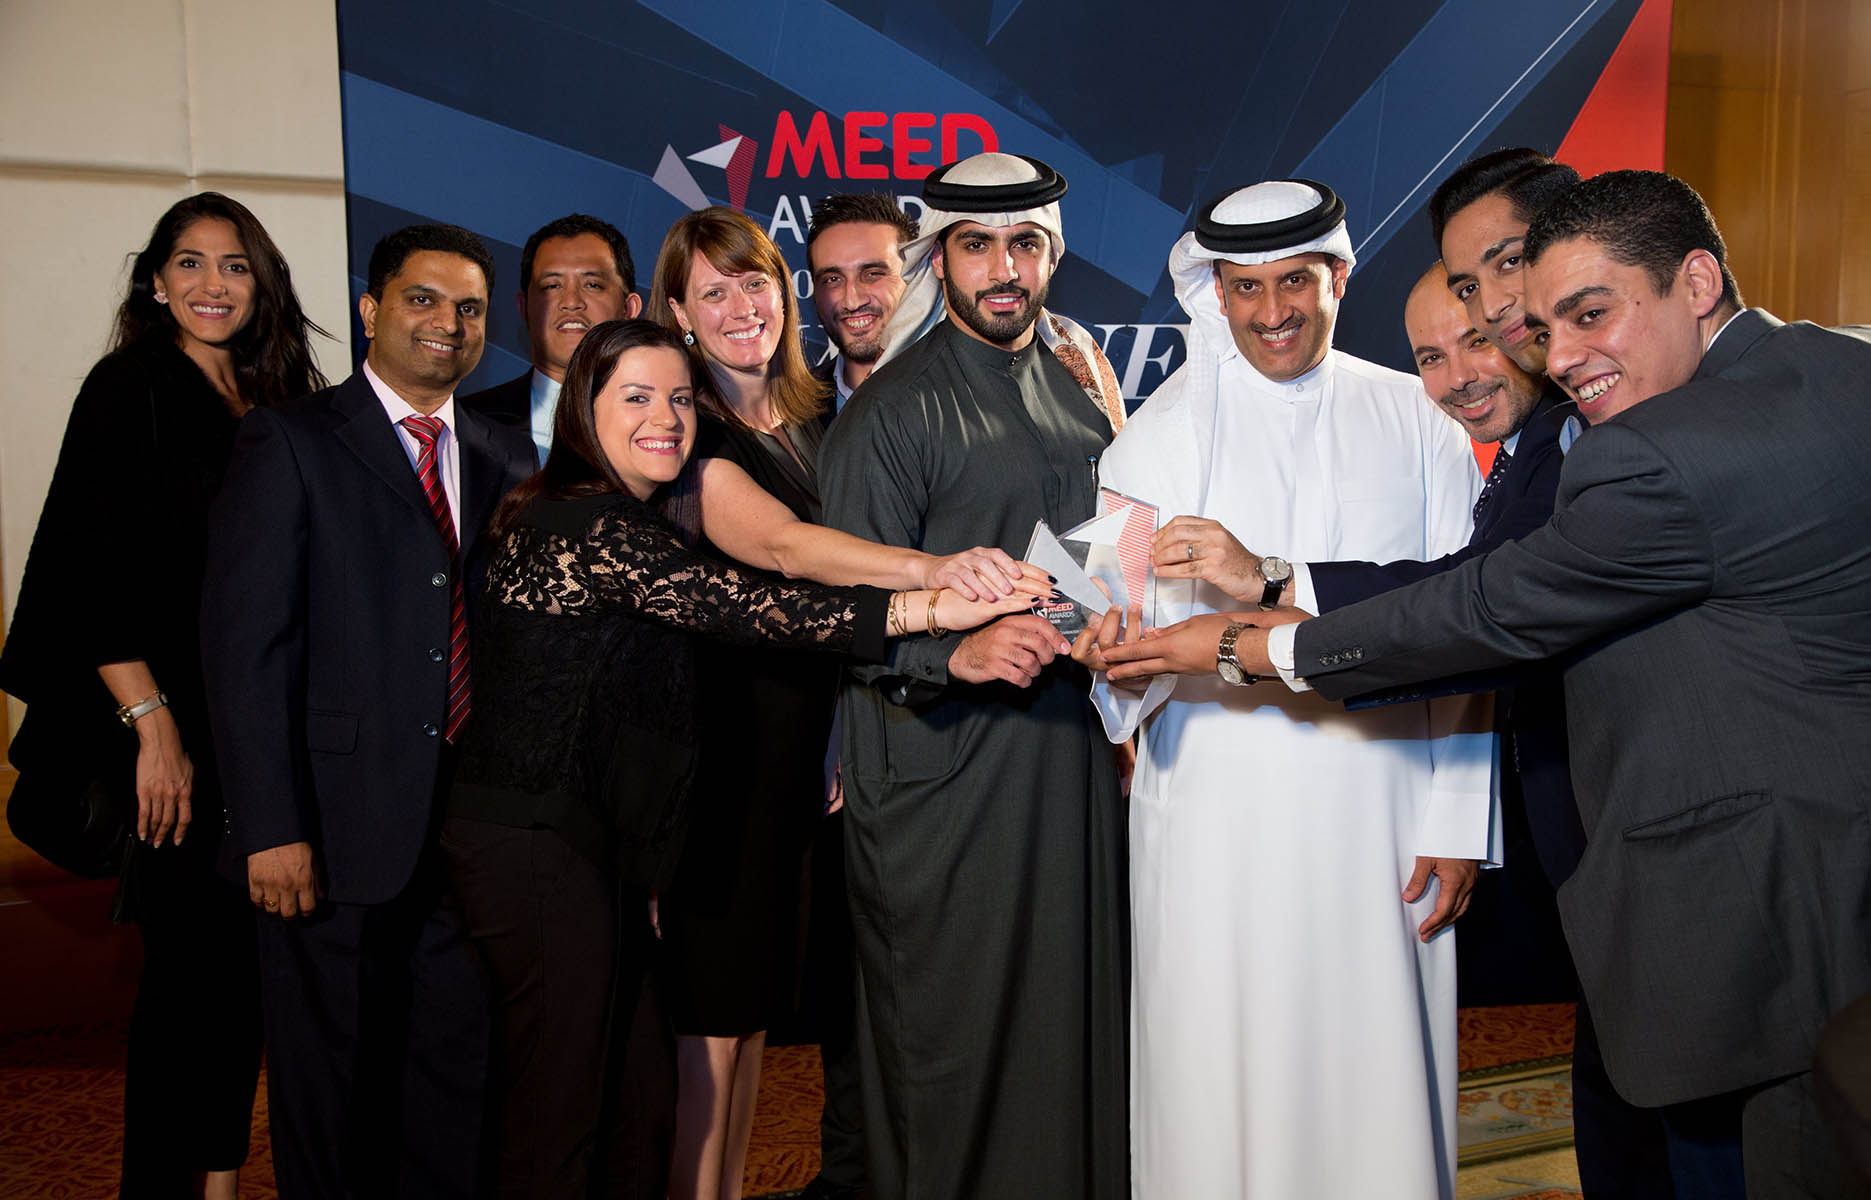 Contractor of the Year Award 2018 by MEED